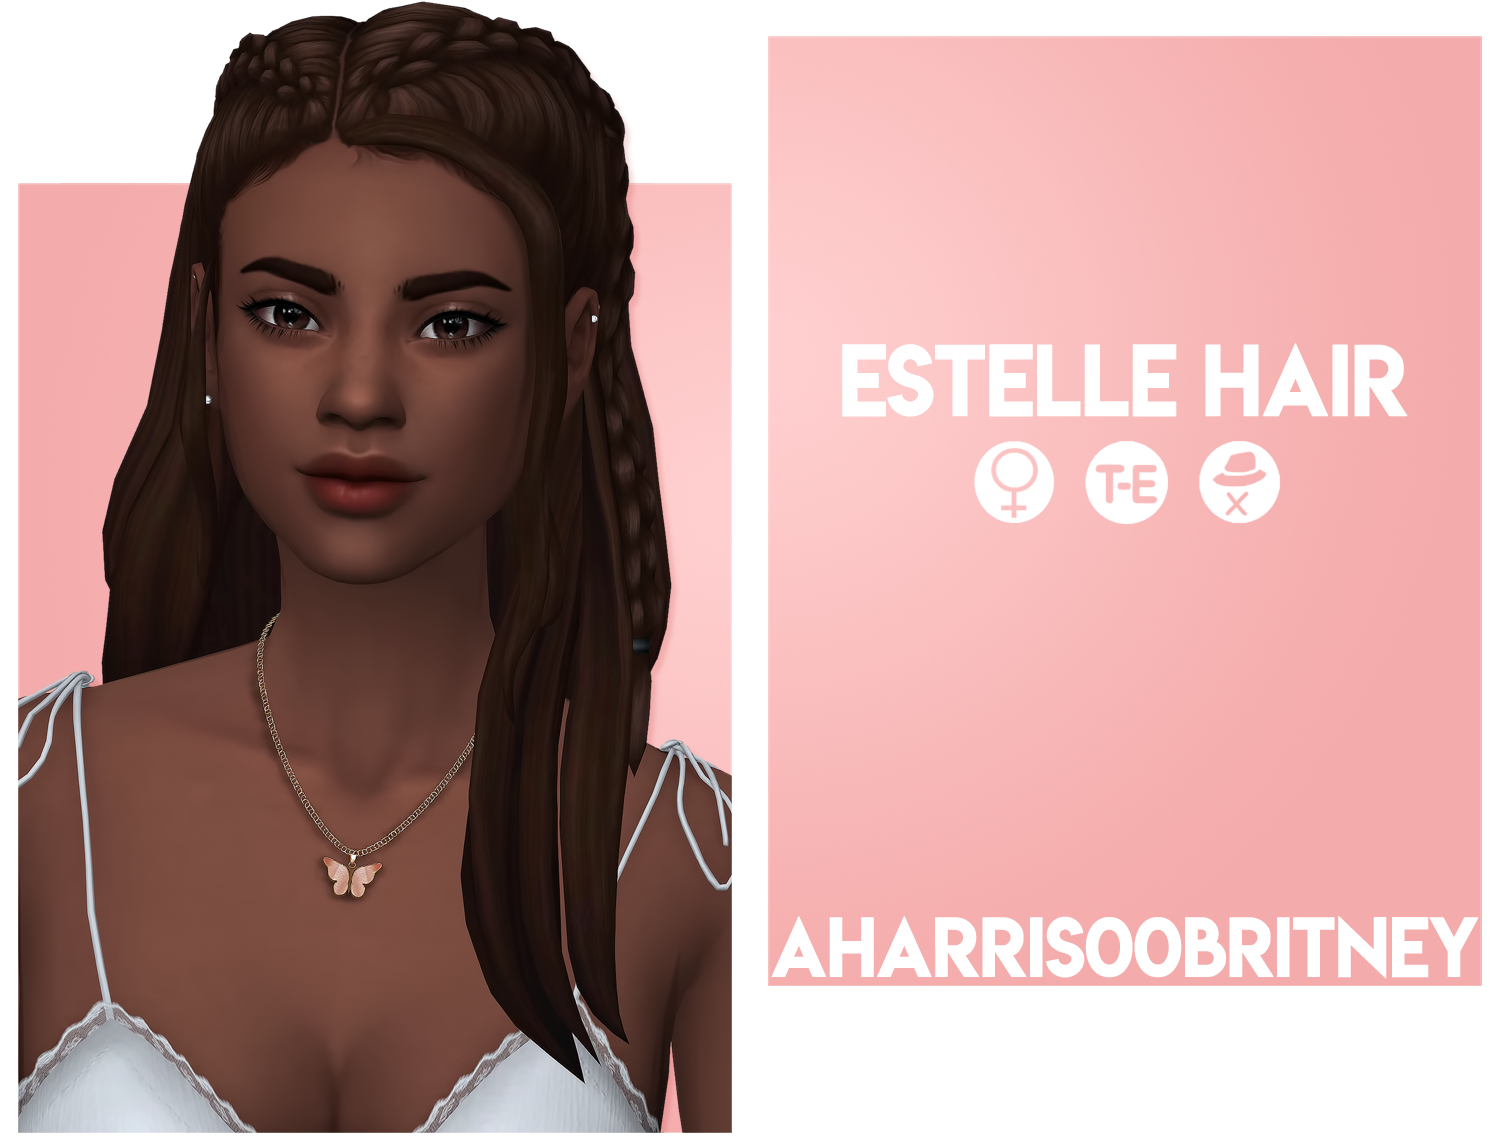 My Sims 4 Blog: Hair and Clothing by Aharris00britney